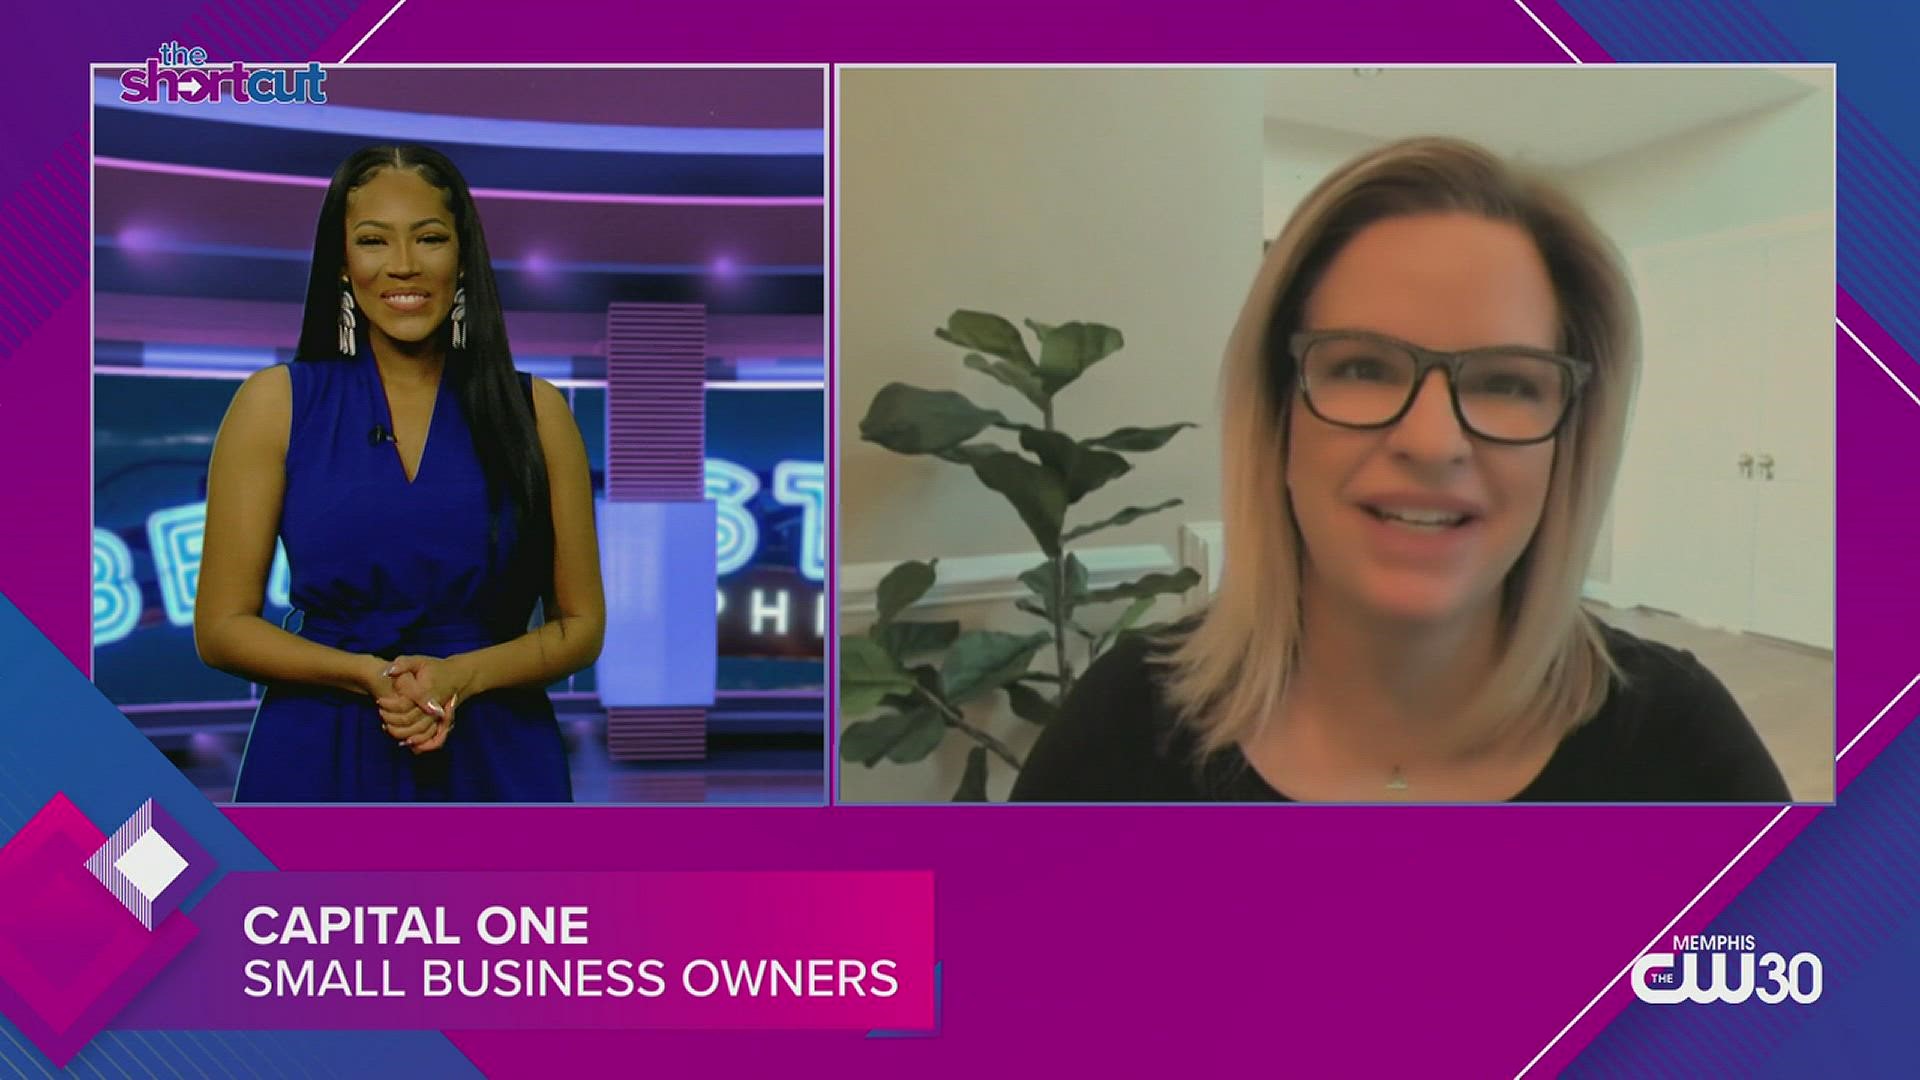 From supply chain issues to The Great Resignation, check out Capital One's insight into pandemic-era small business owners' lives! Featuring Jenn Flynn!